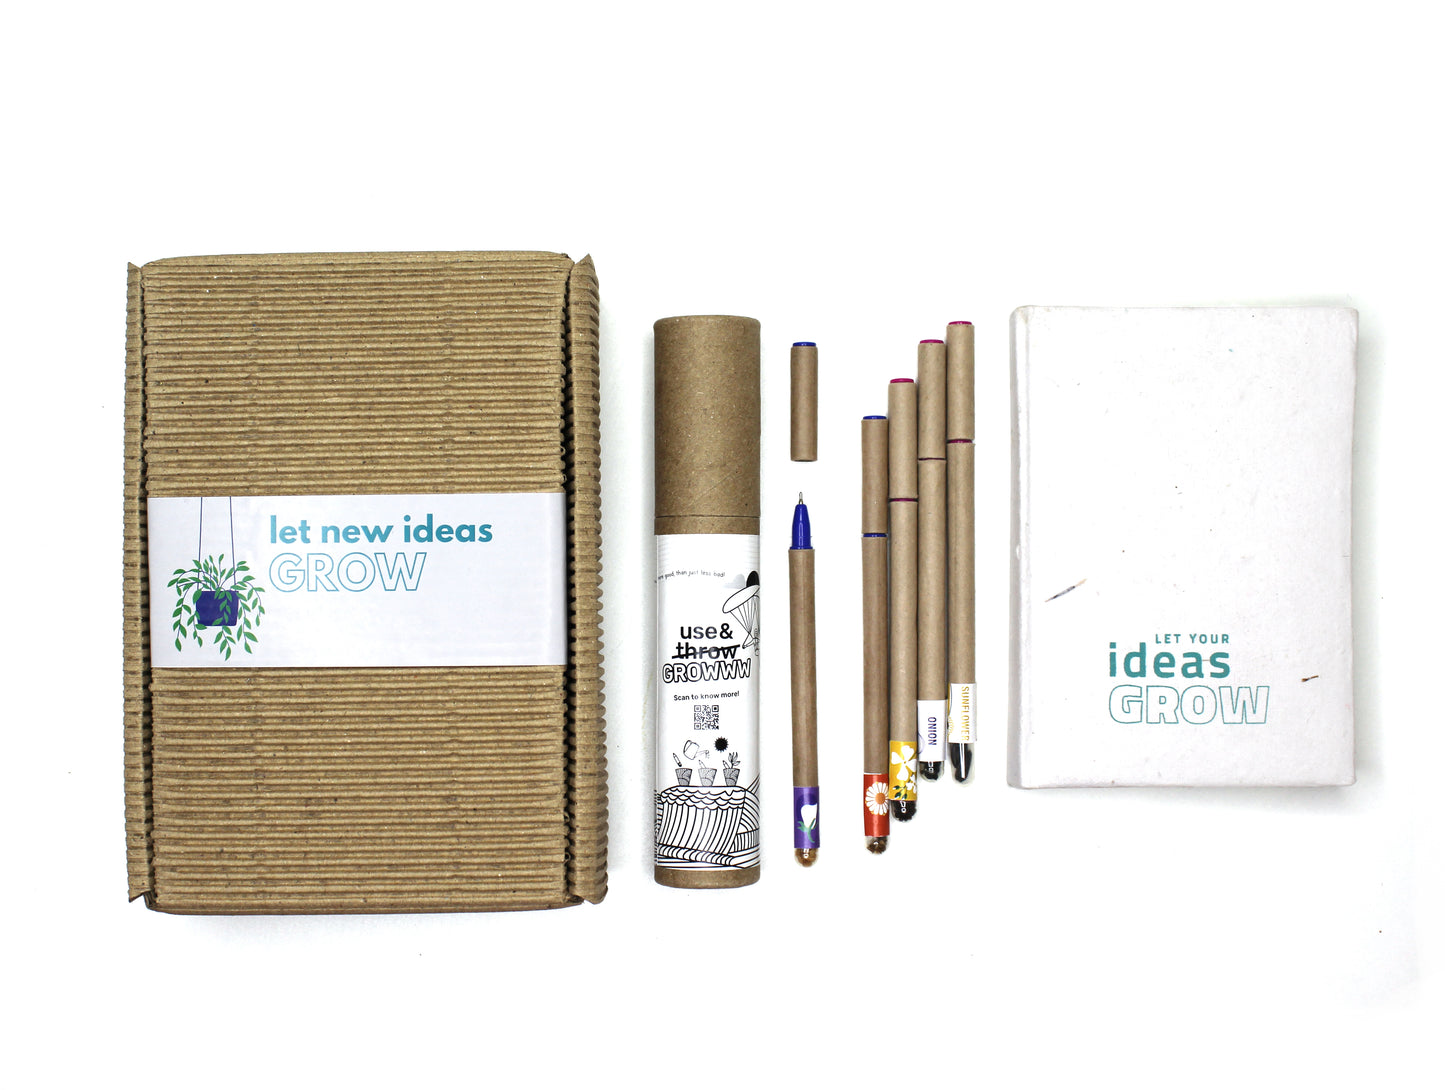 "5 Seed Pens Plantable Diary A6 | 160pg Packed in Recycled Paper  Folding Box"